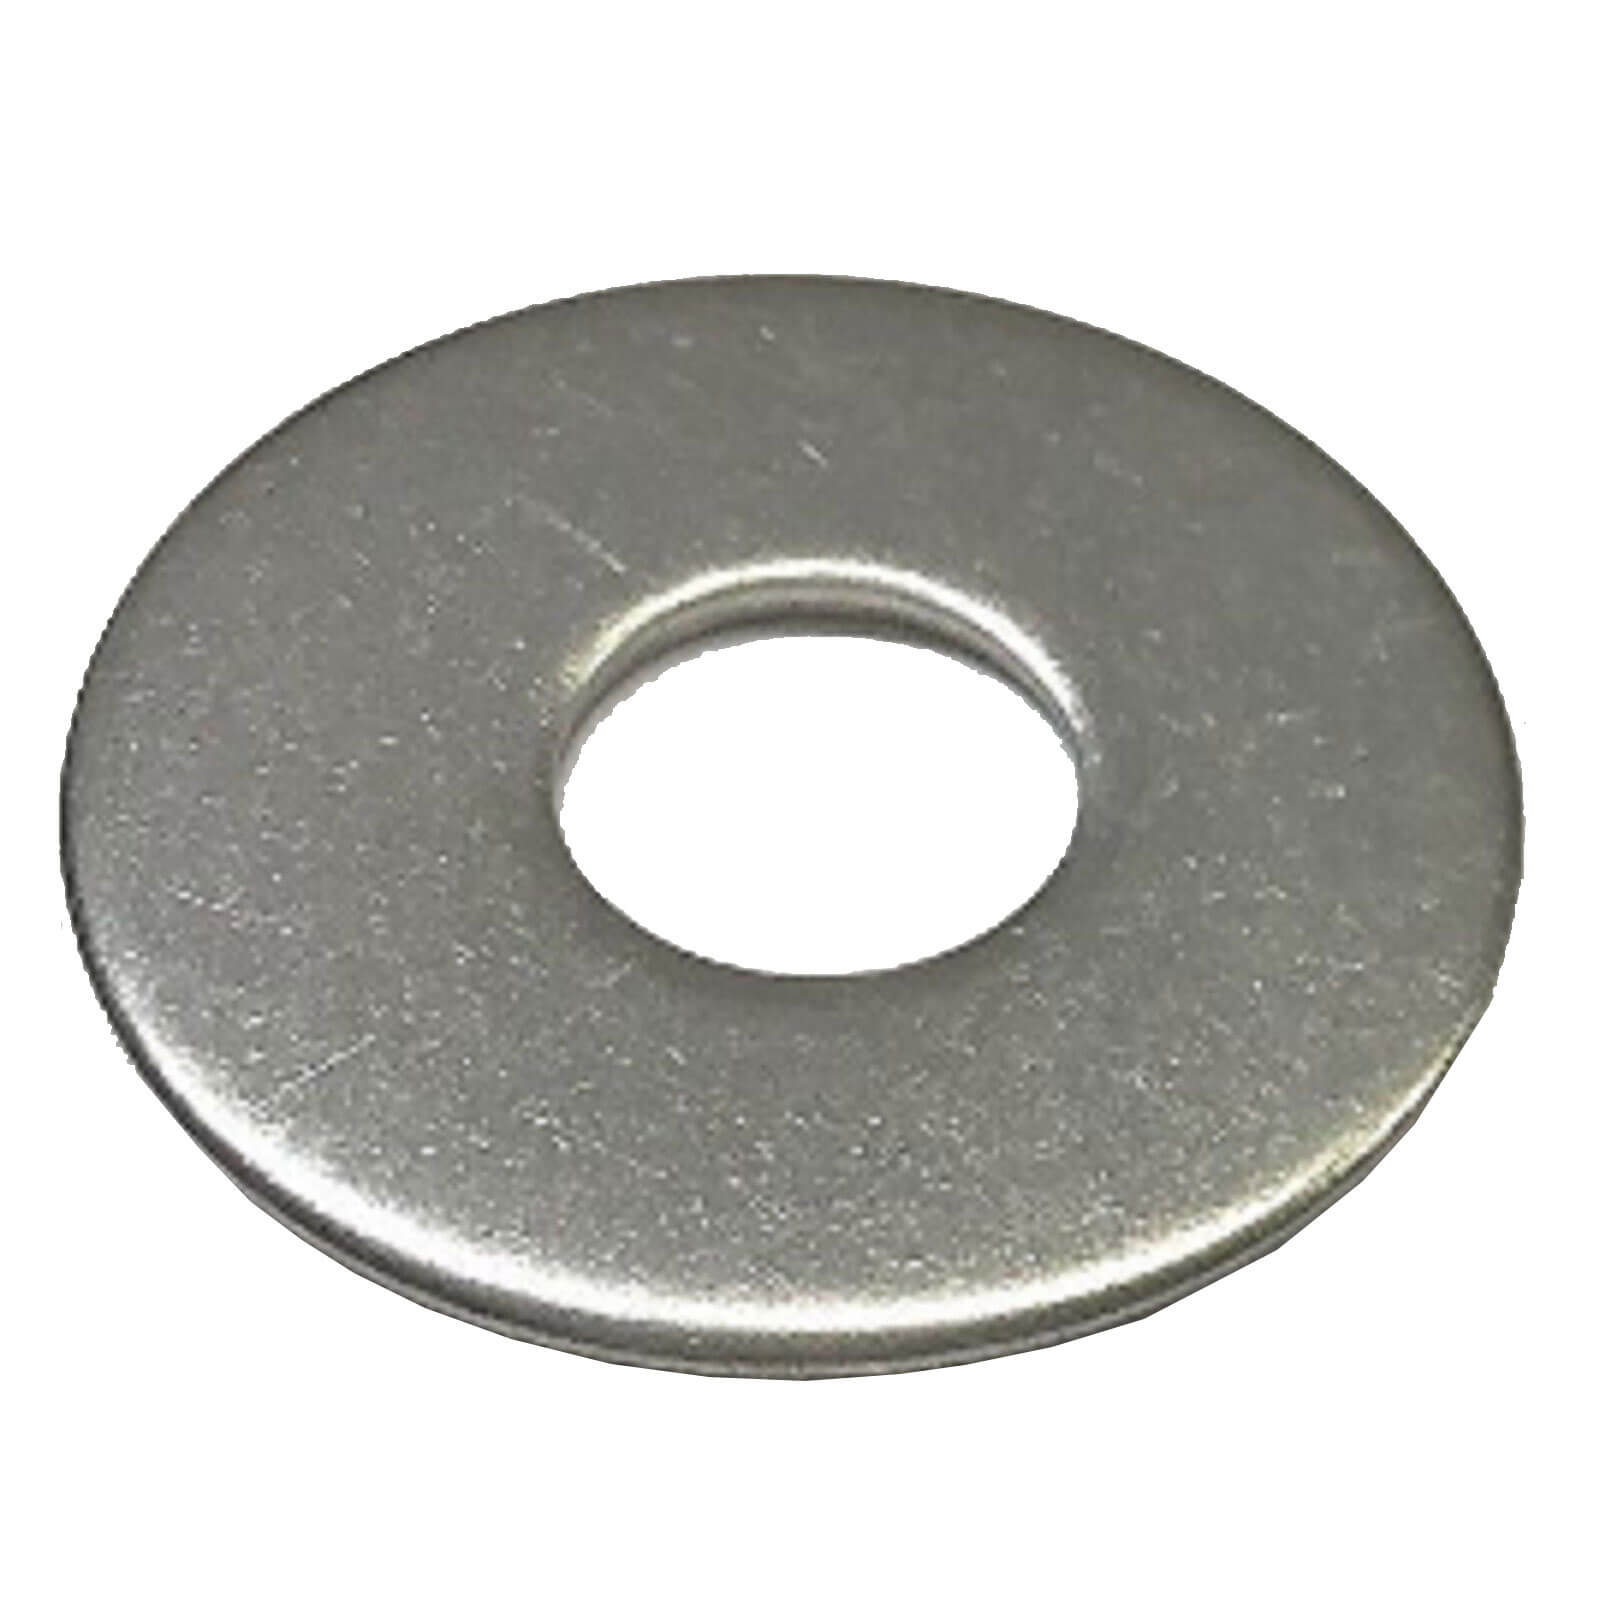 Image of Penny Repair Washers Zinc Plated 6mm 30mm Pack of 2500